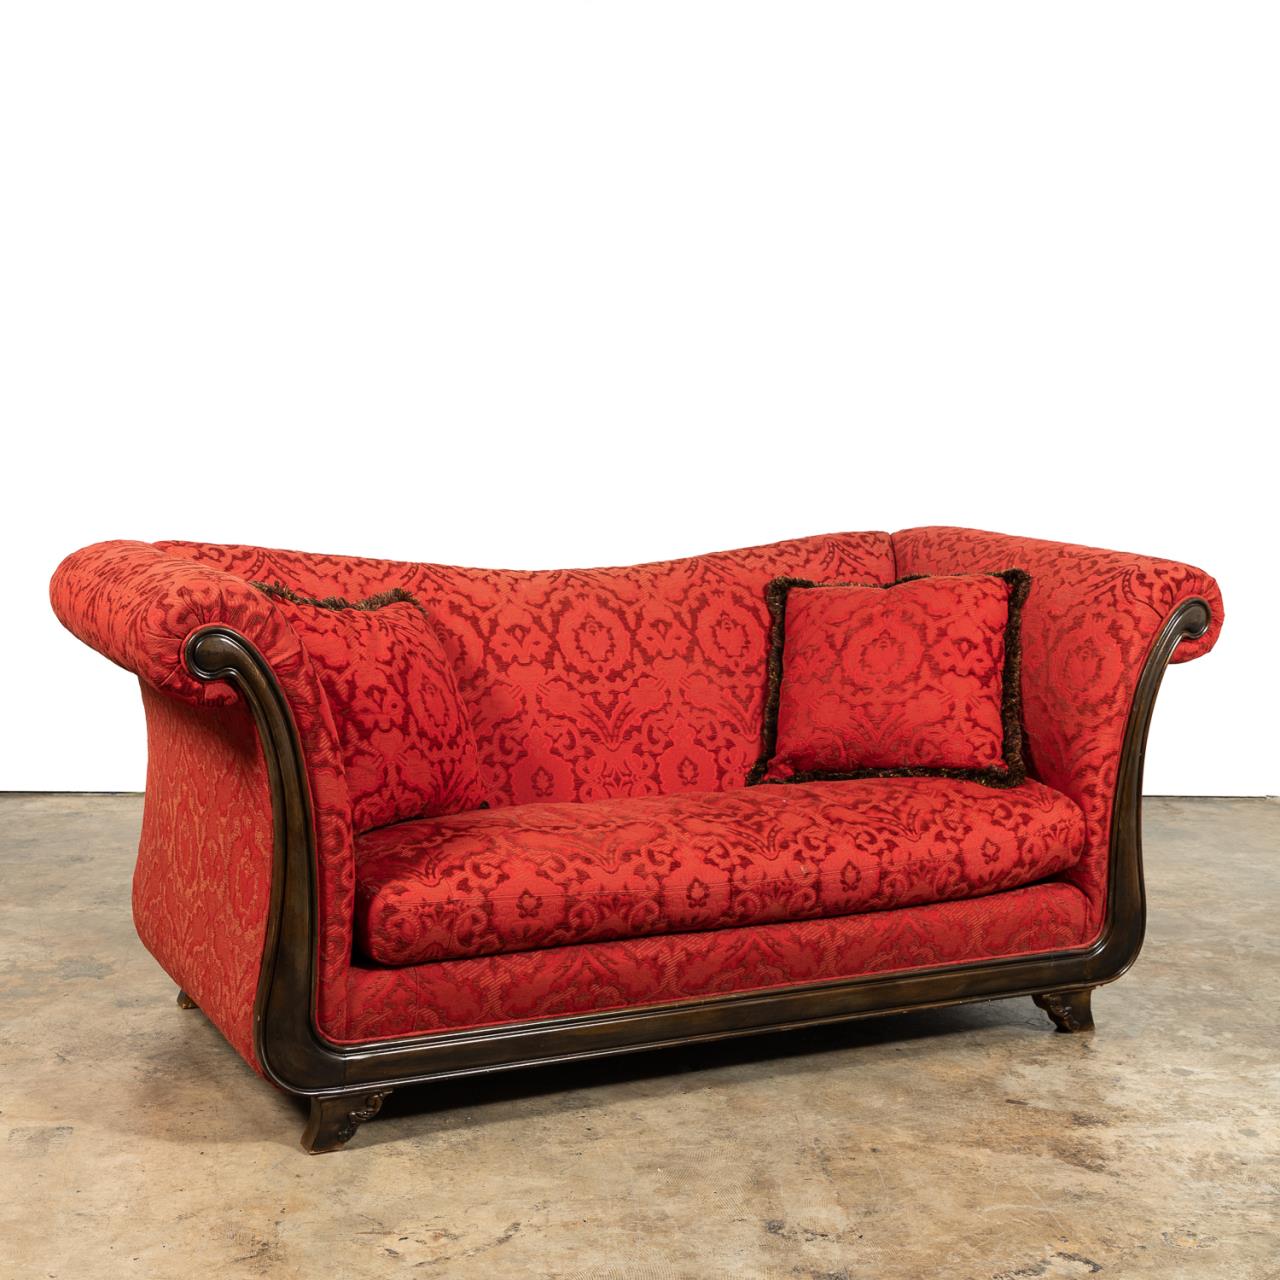 AMERICAN EMPIRE STYLE RED UPHOLSTERED